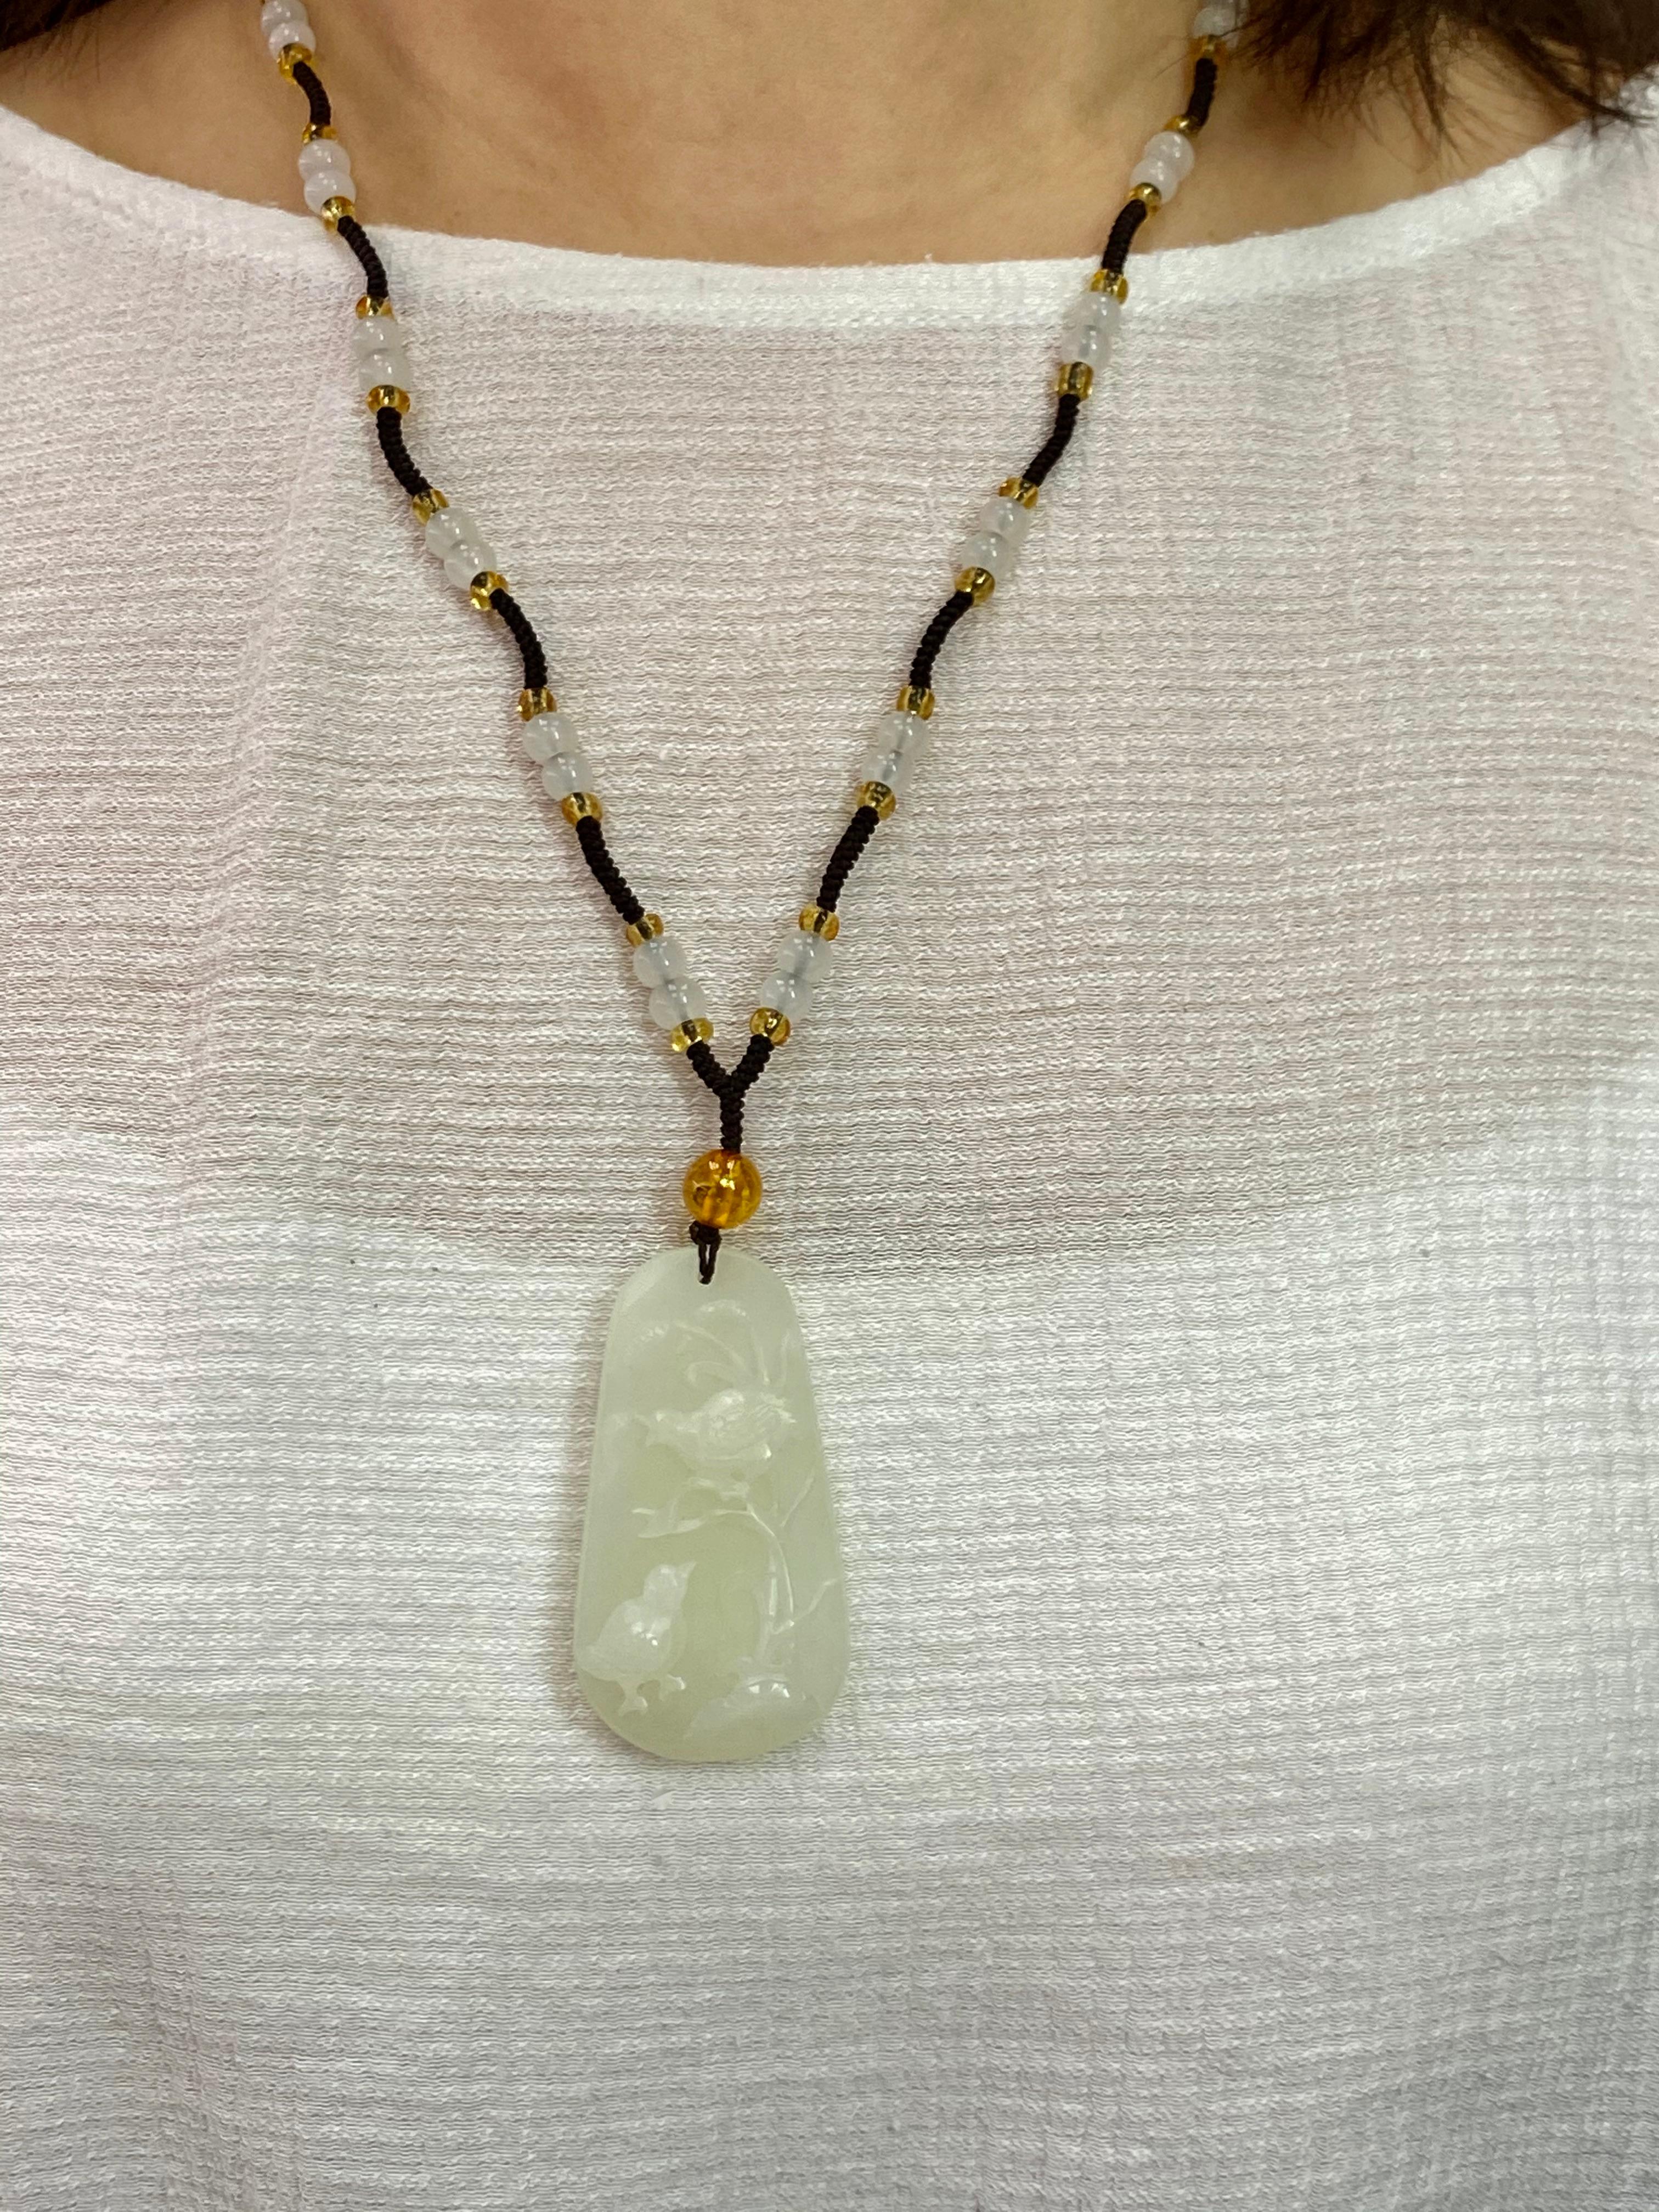 Hand Carved Natural Hetian Nephrite Jade Scorpion Pendant Necklace w certificate 